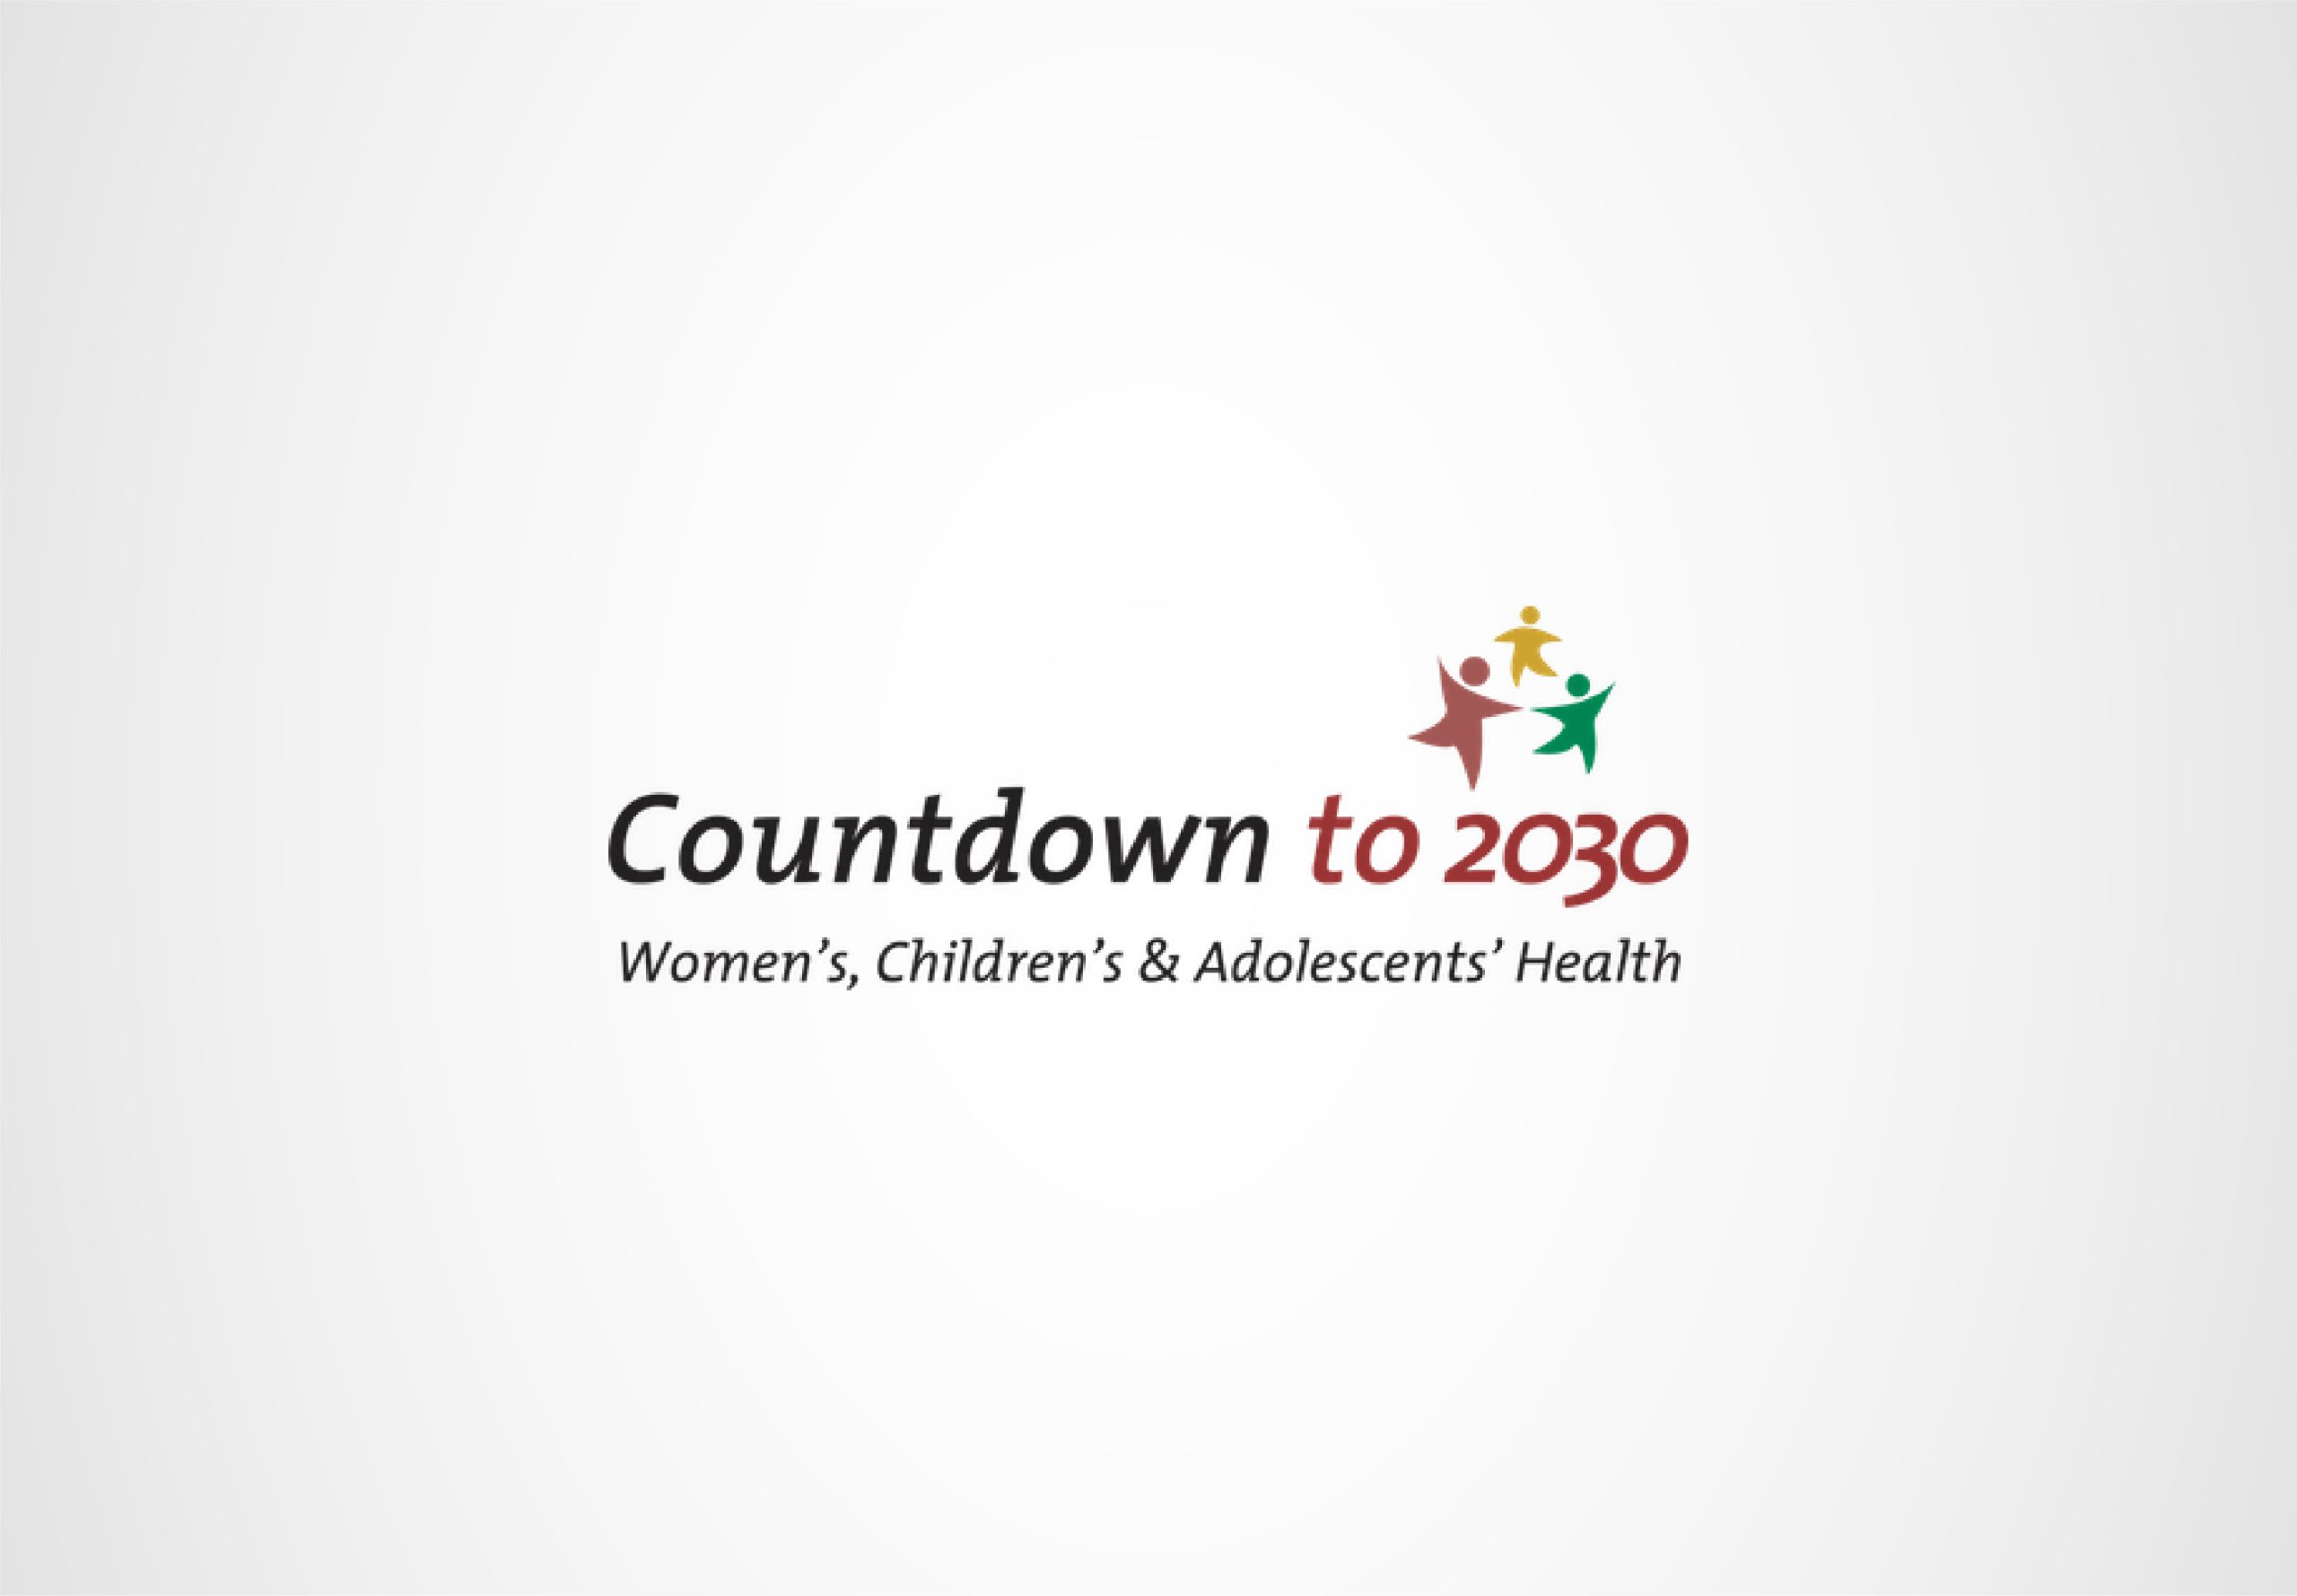 APHRC Joined Countdown 2030 as lead for the Africa regional initiative